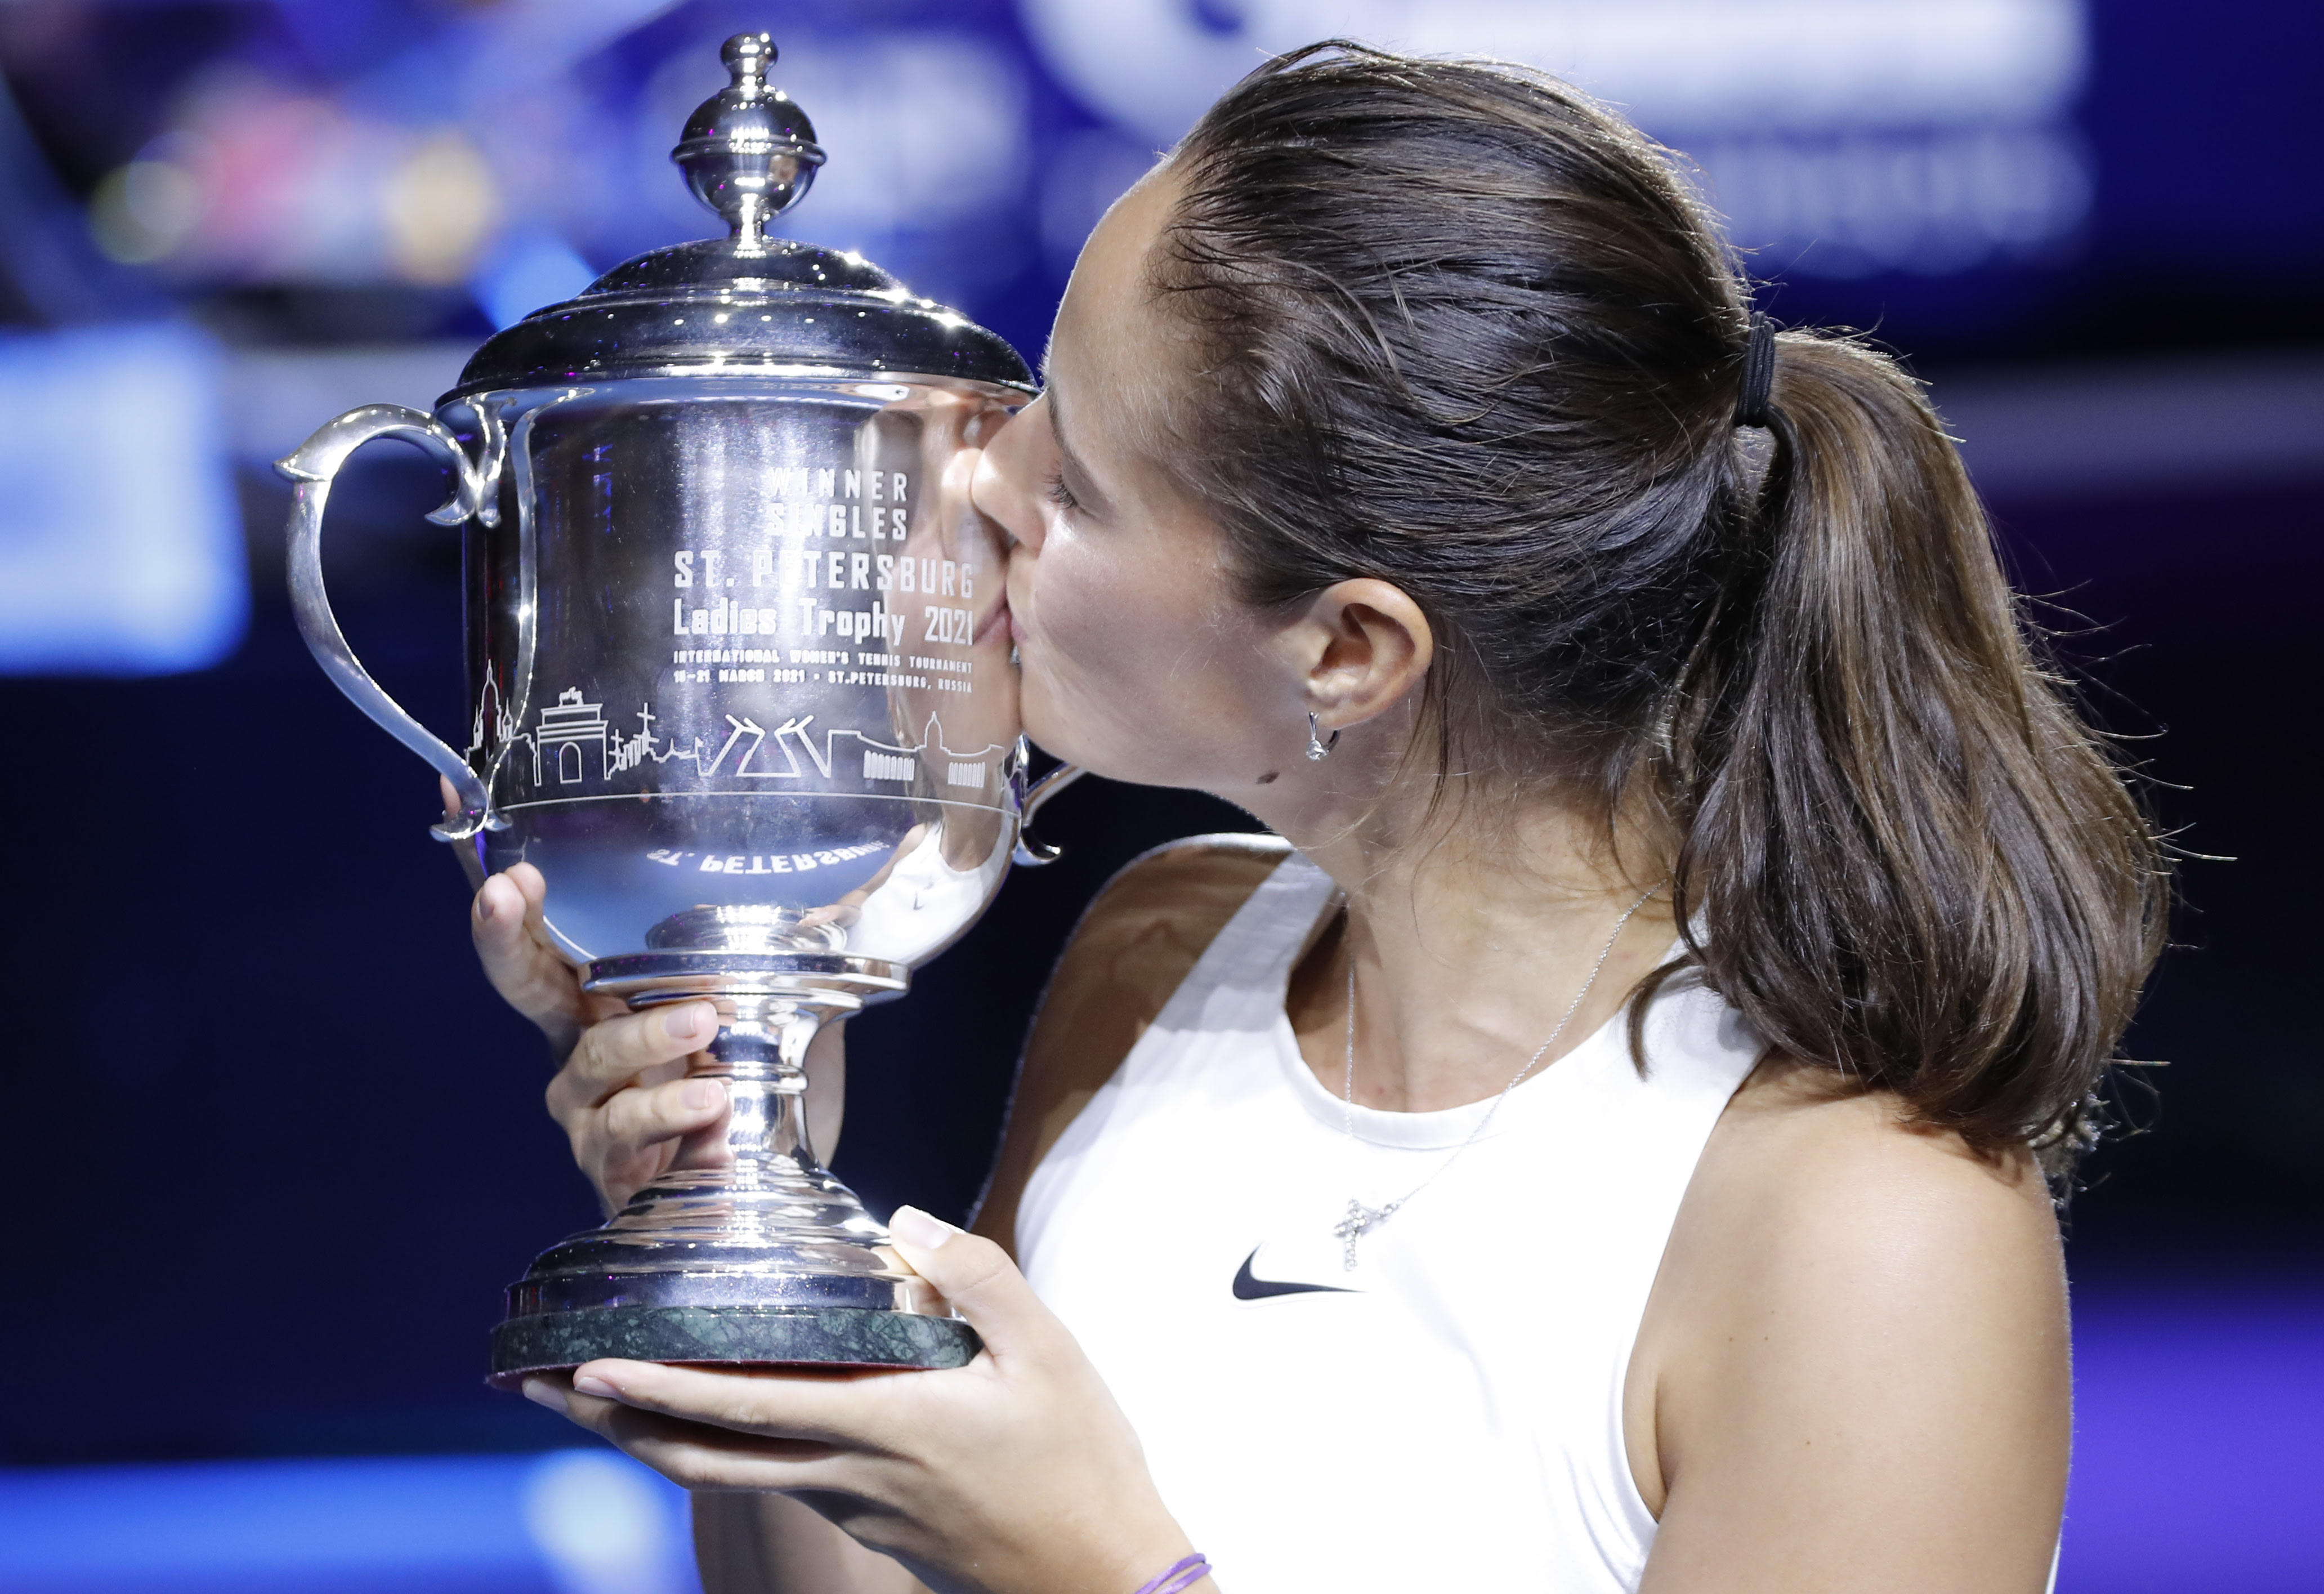 Daria Kasatkina becomes first Russian woman to win St